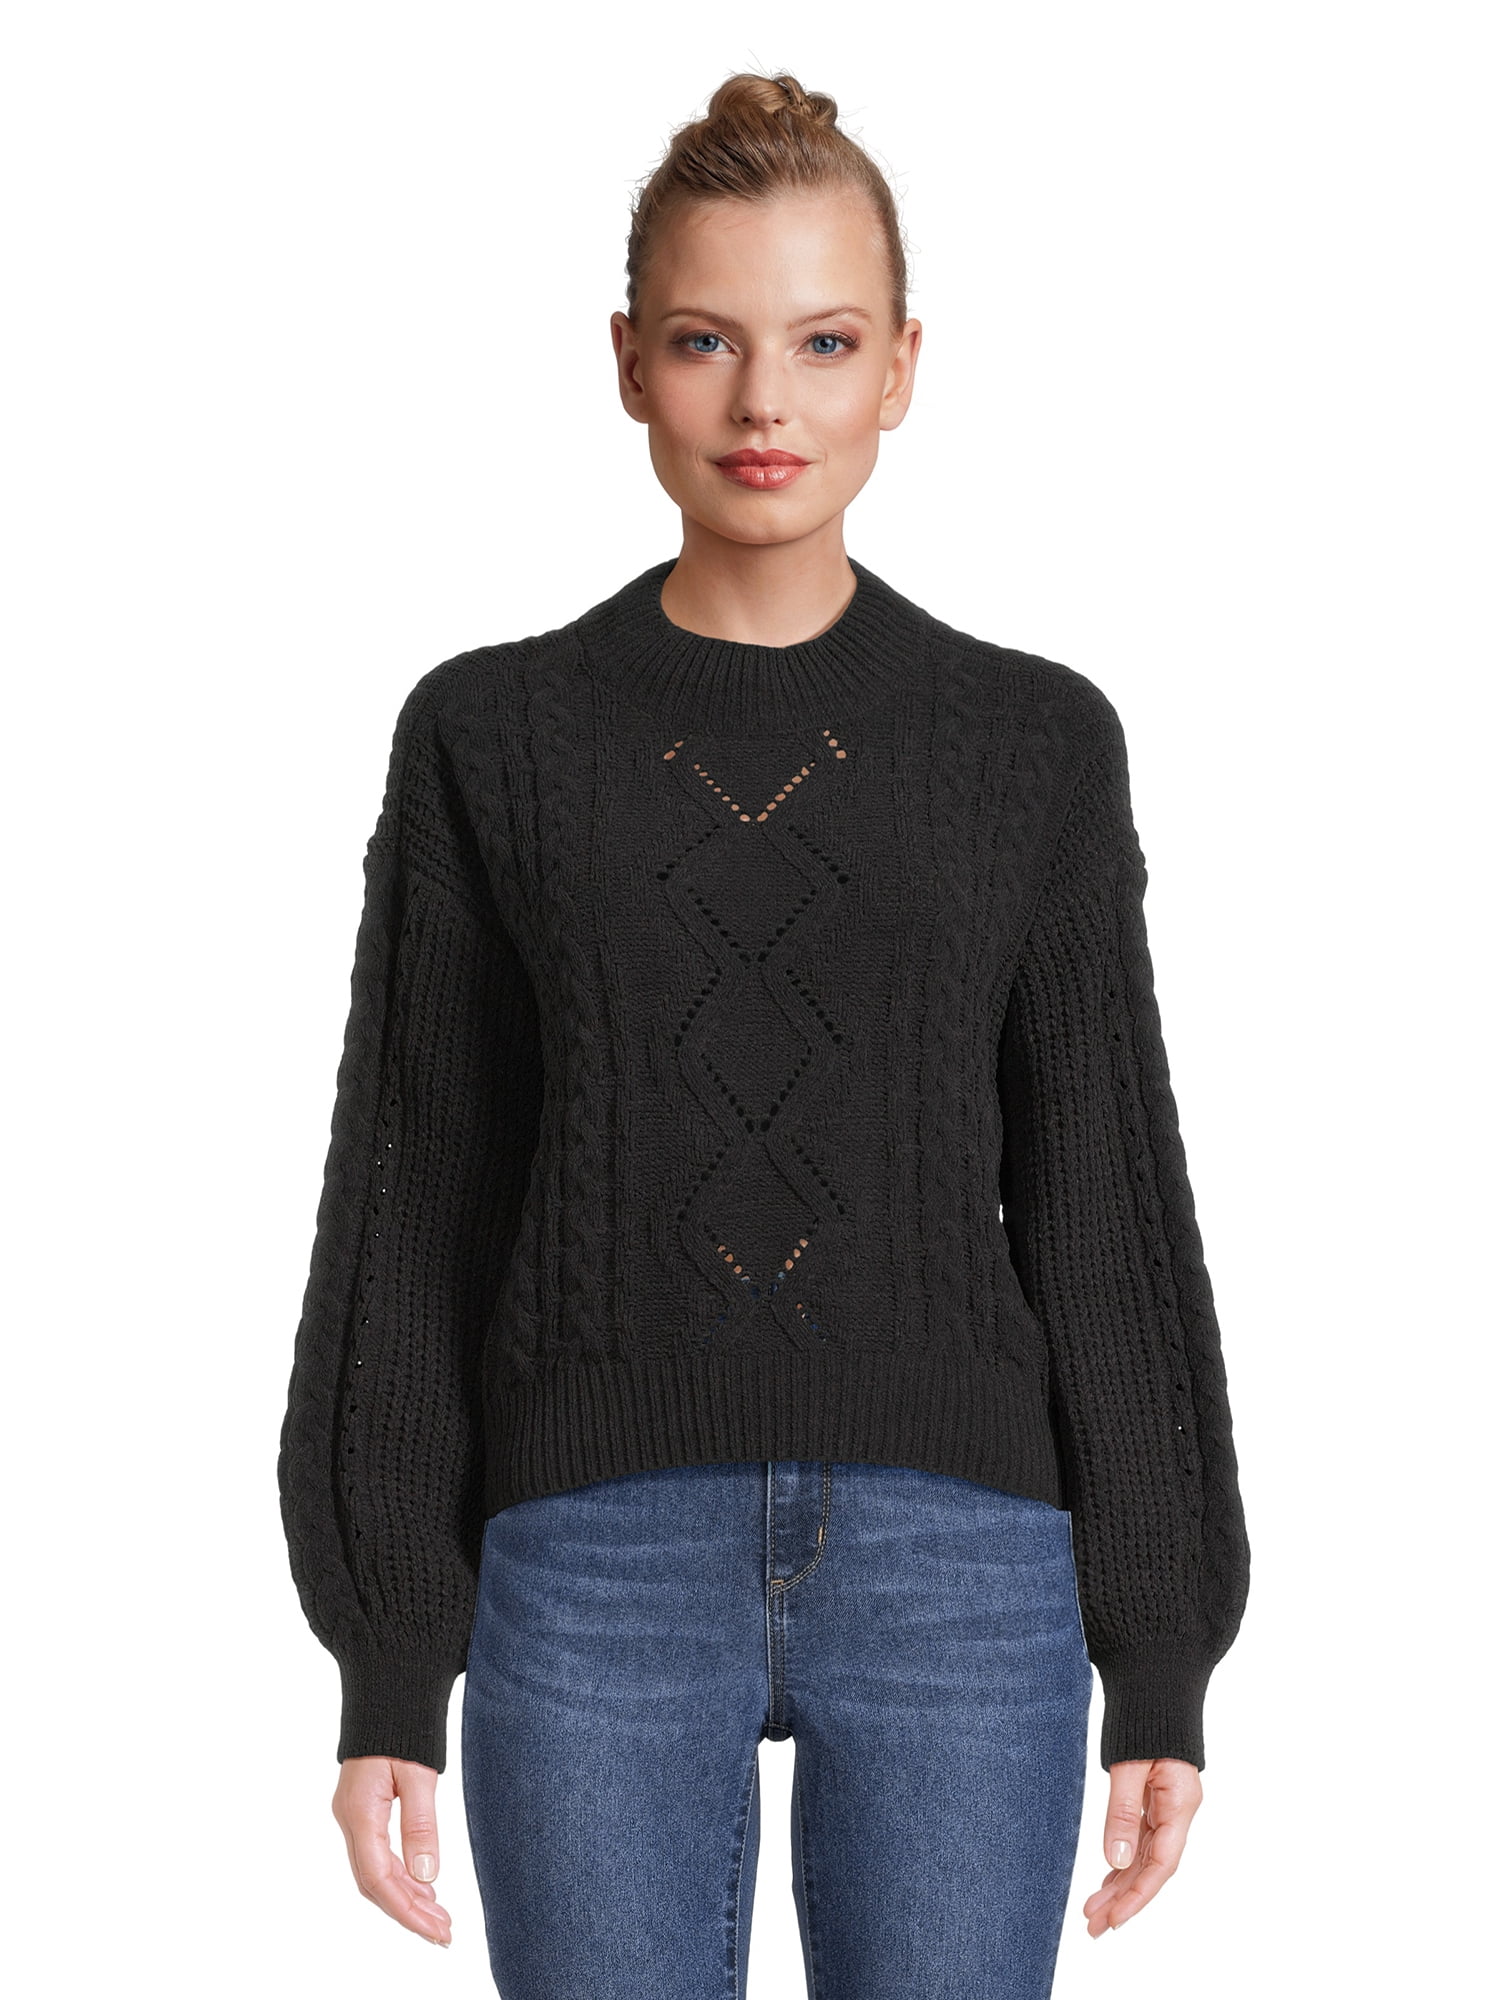 No Boundaries Juniors’ Mock Neck Cable Knit Sweater, Midweight, Sizes ...